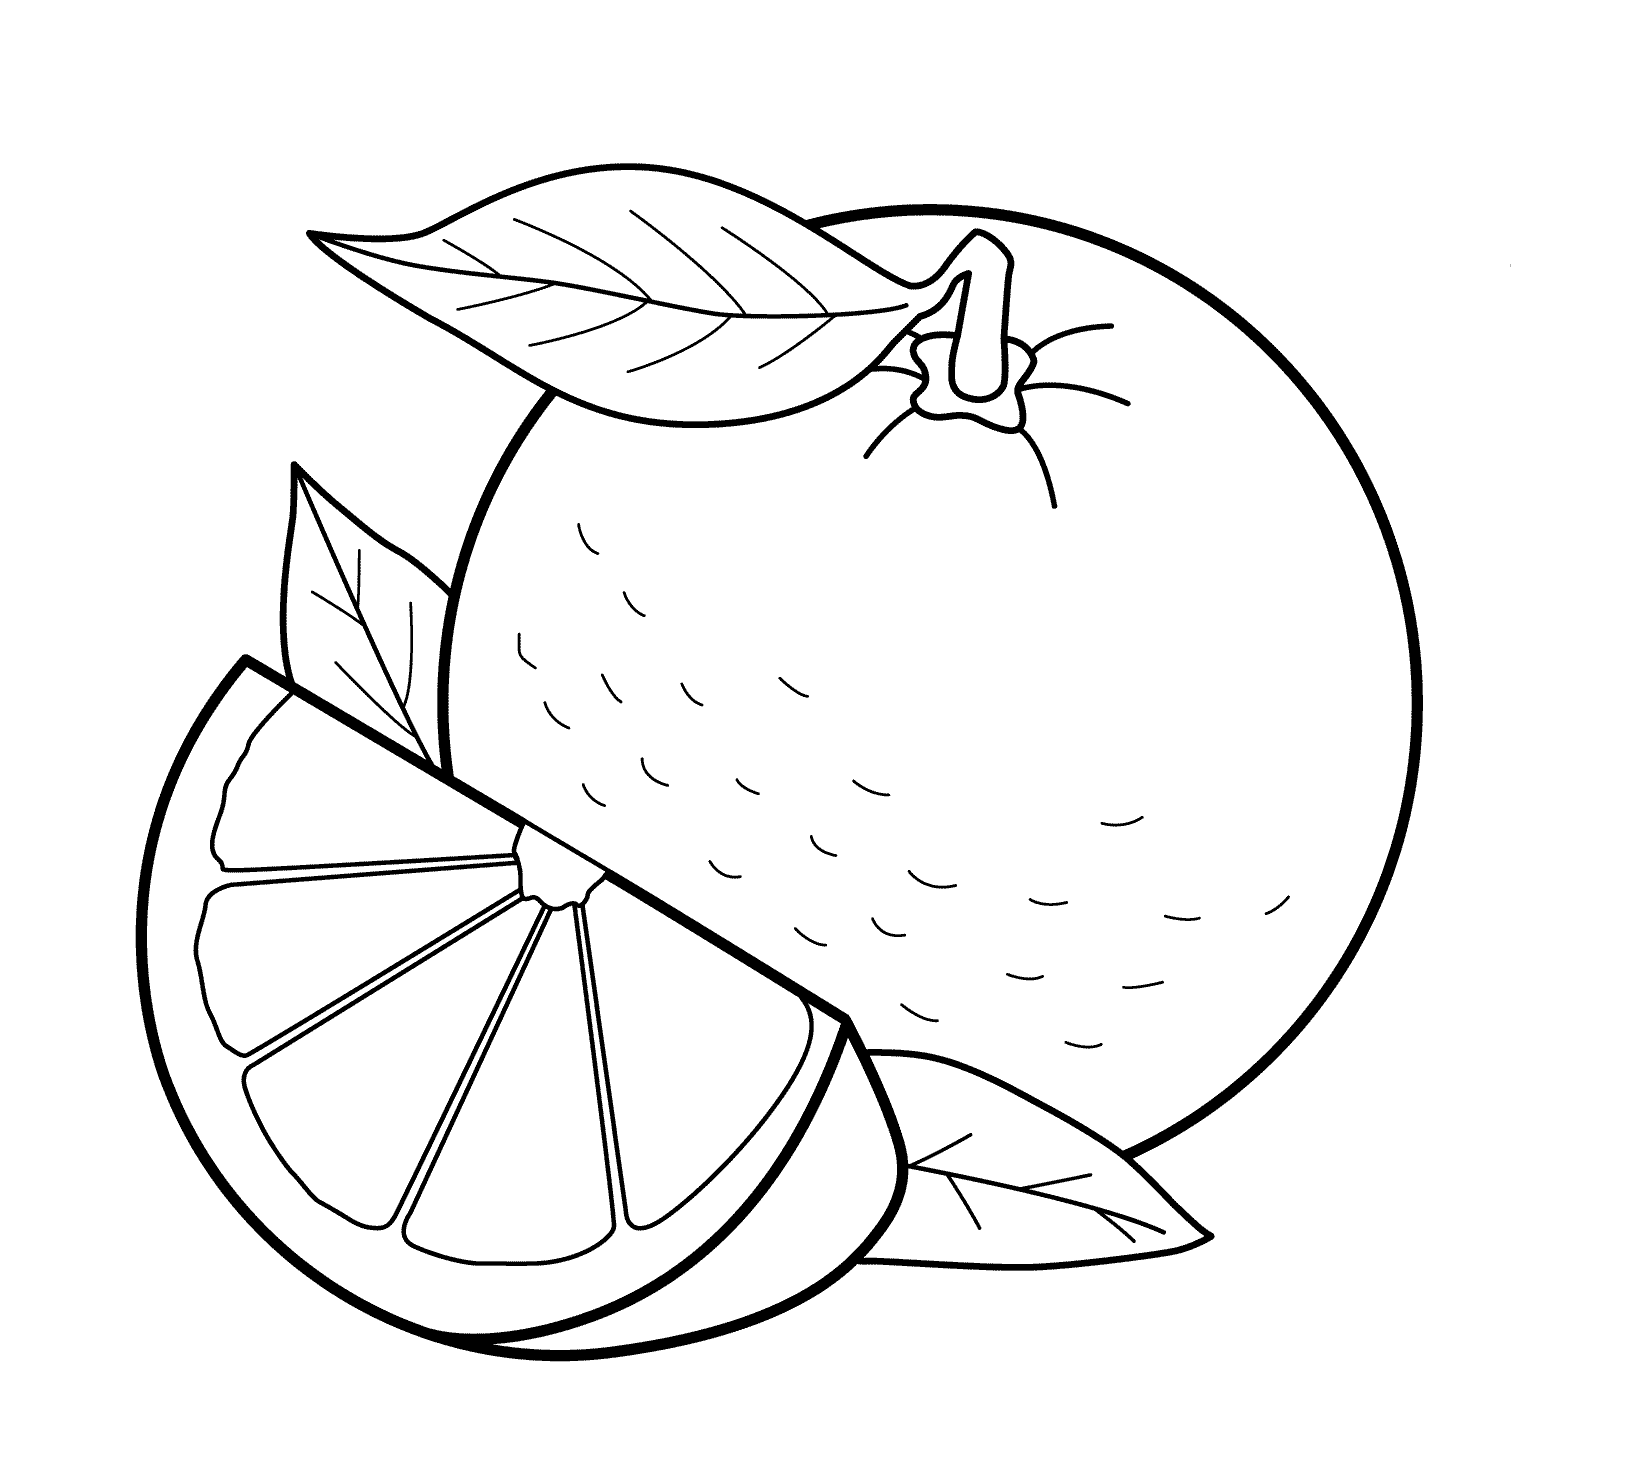 Easy Orange Fruit Coloring Page